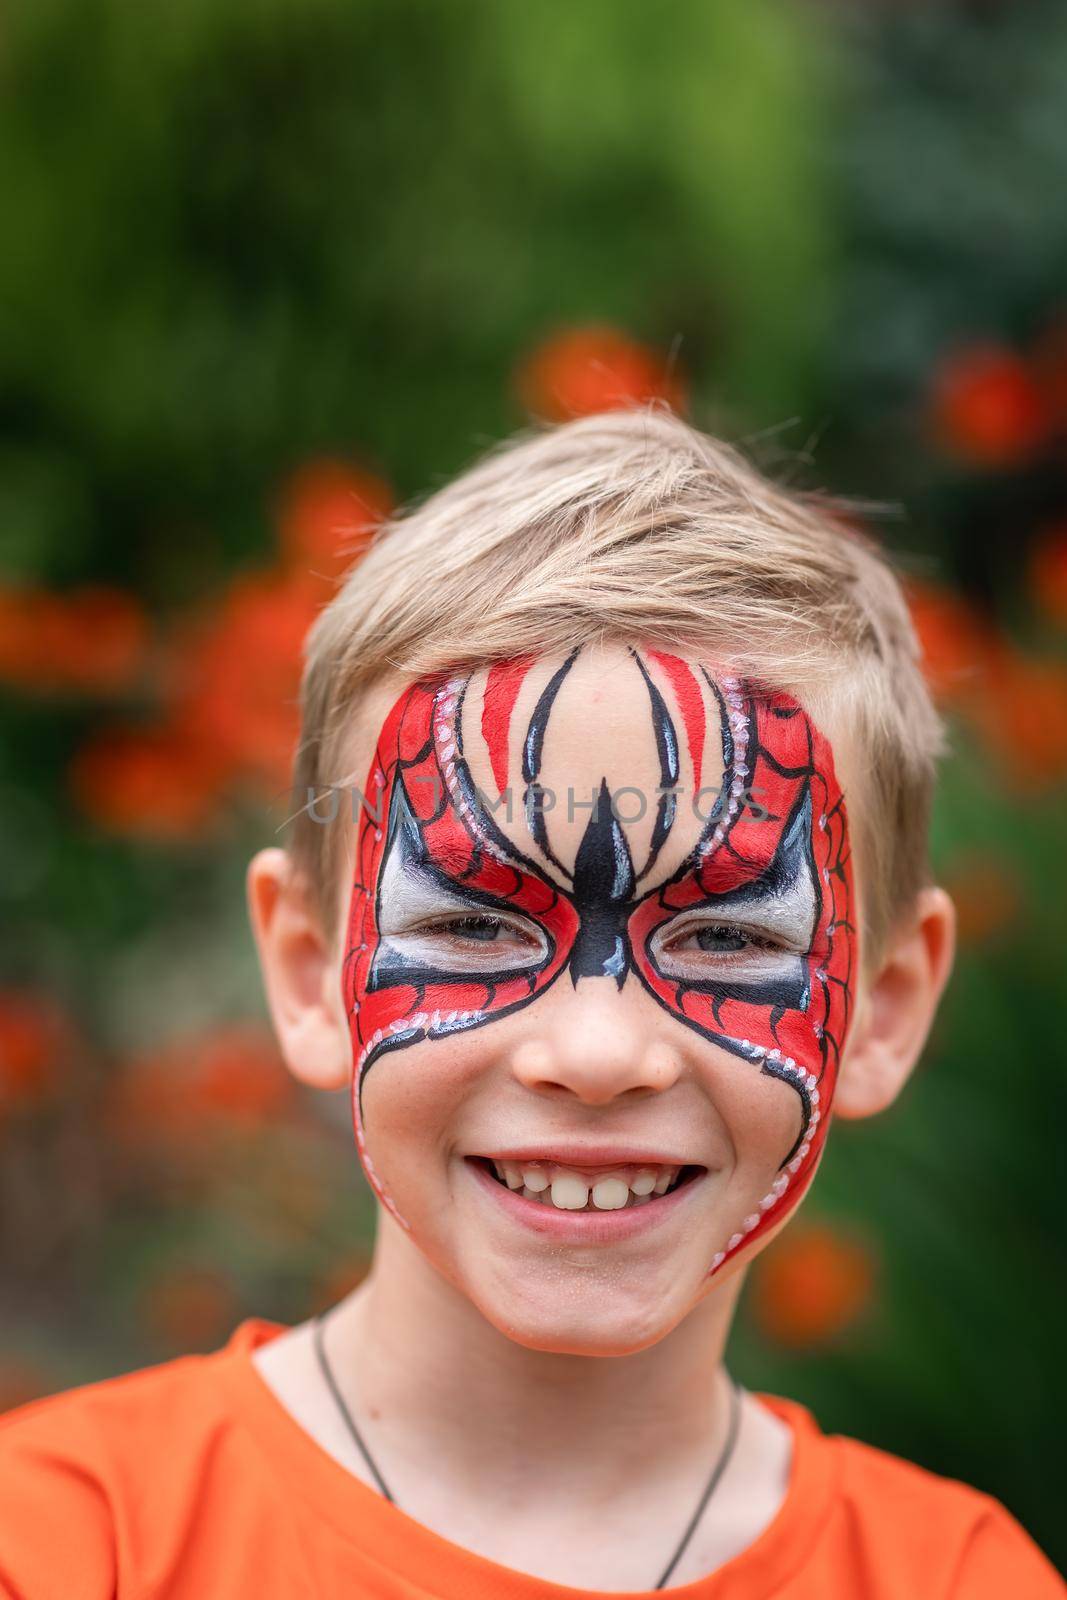 Cute little boy with face paint. Face painting, kid painting face at the birthday party or on holidays